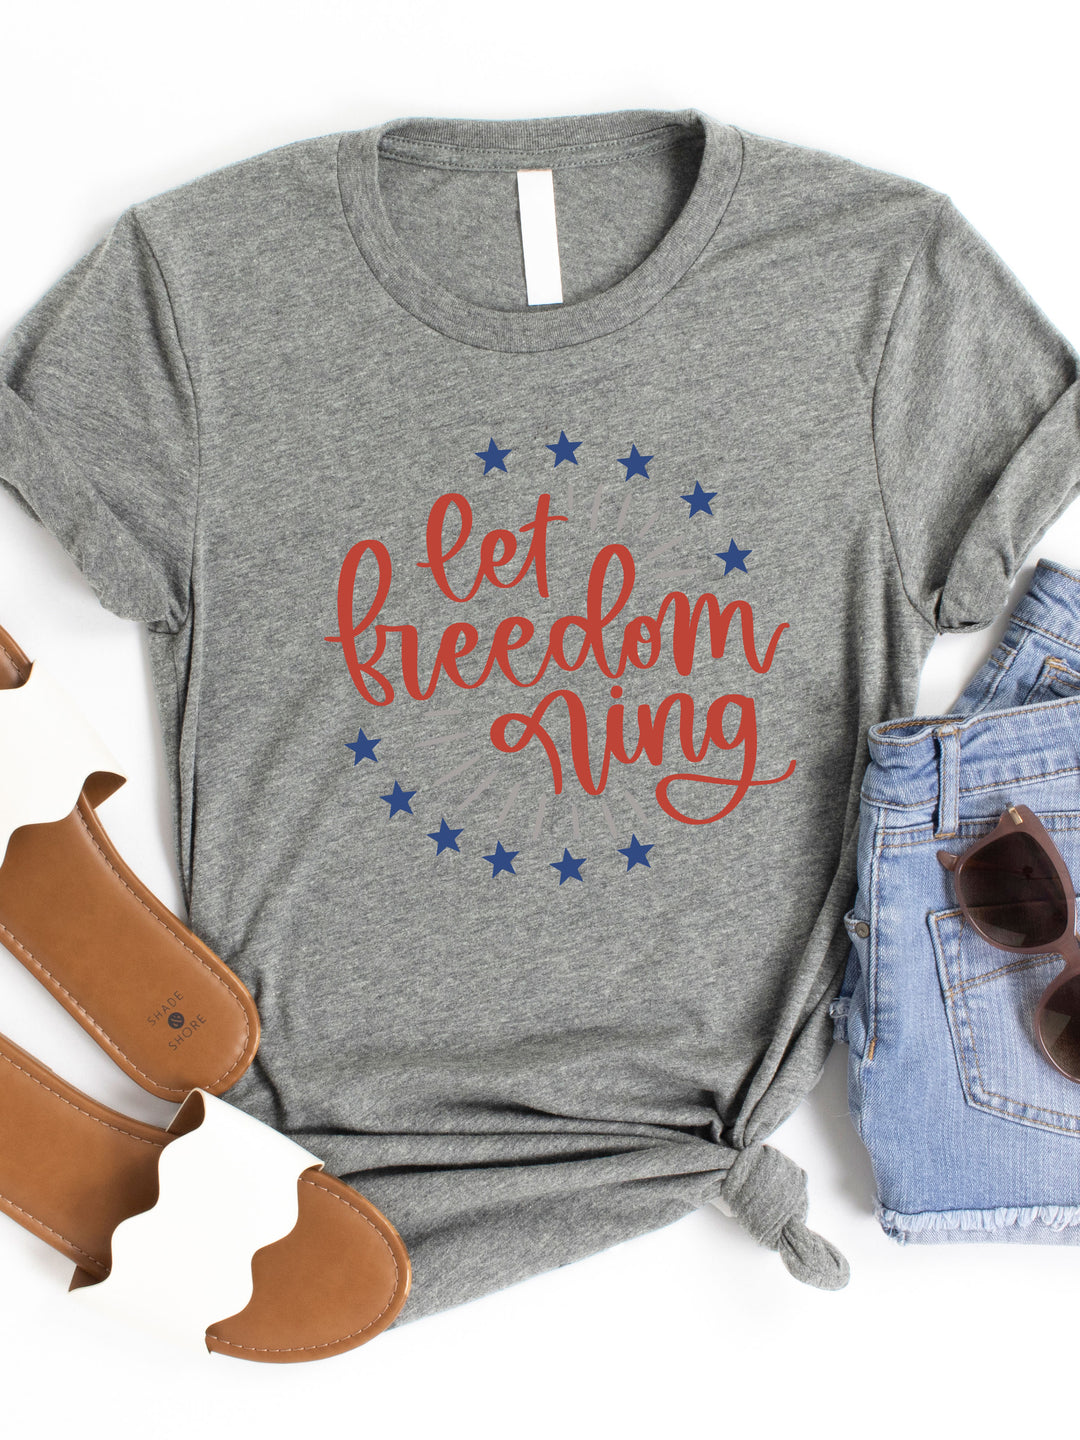 Let Freedom Ring Graphic Tee